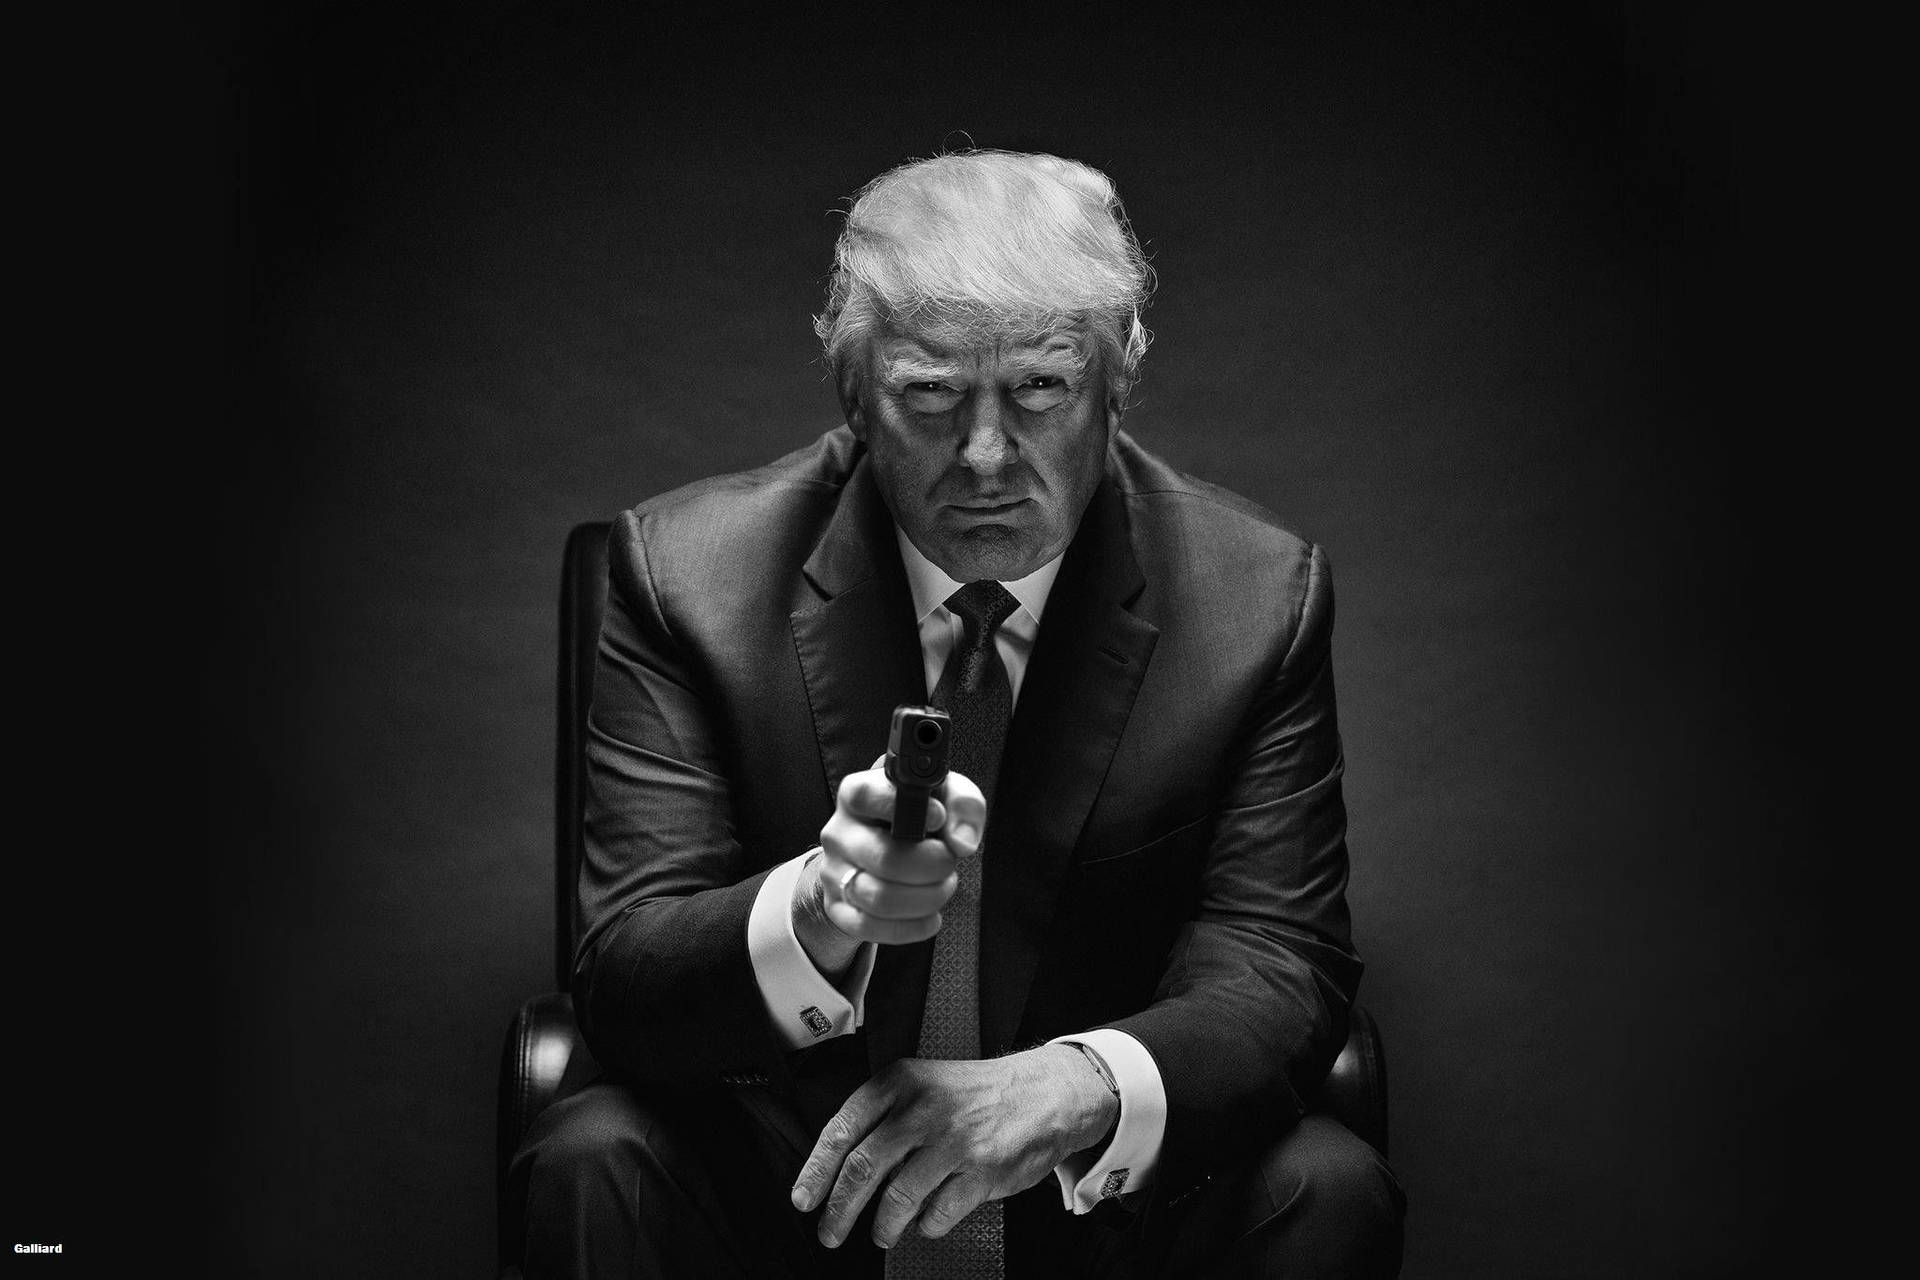 Black and white wallpaper of Donald Trump pointing a gun